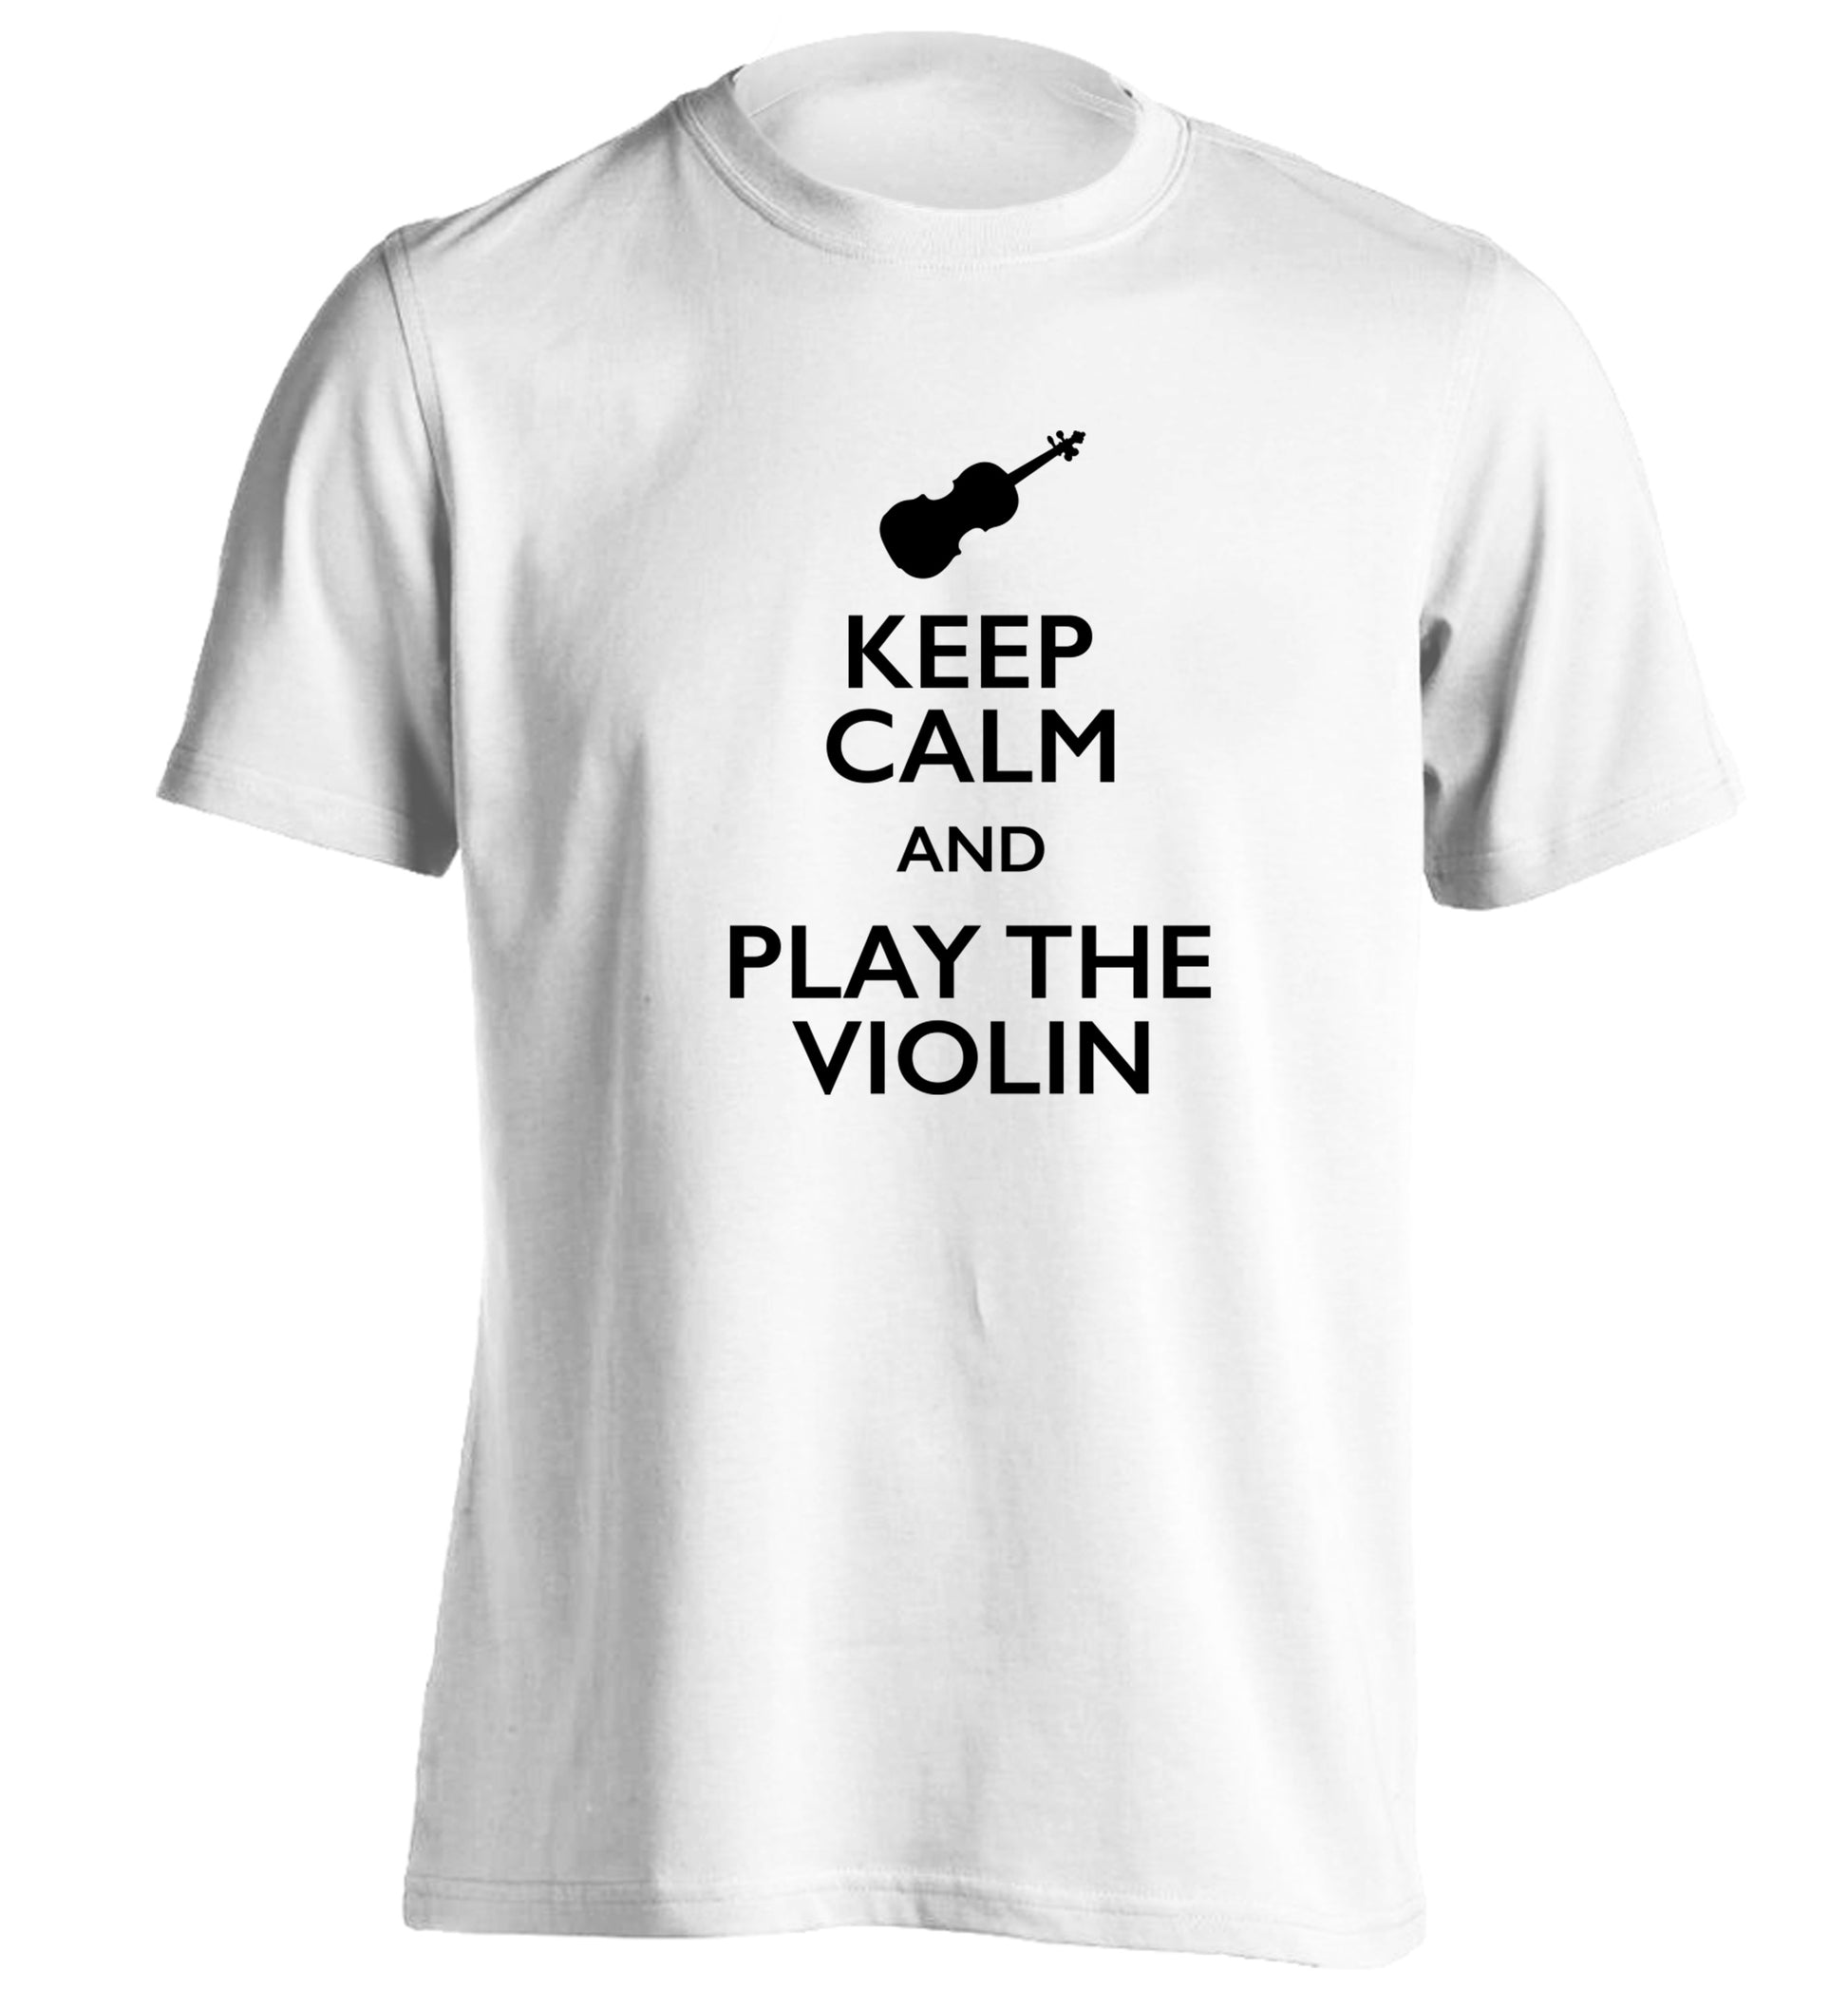 Keep calm and play the violin adults unisex white Tshirt 2XL